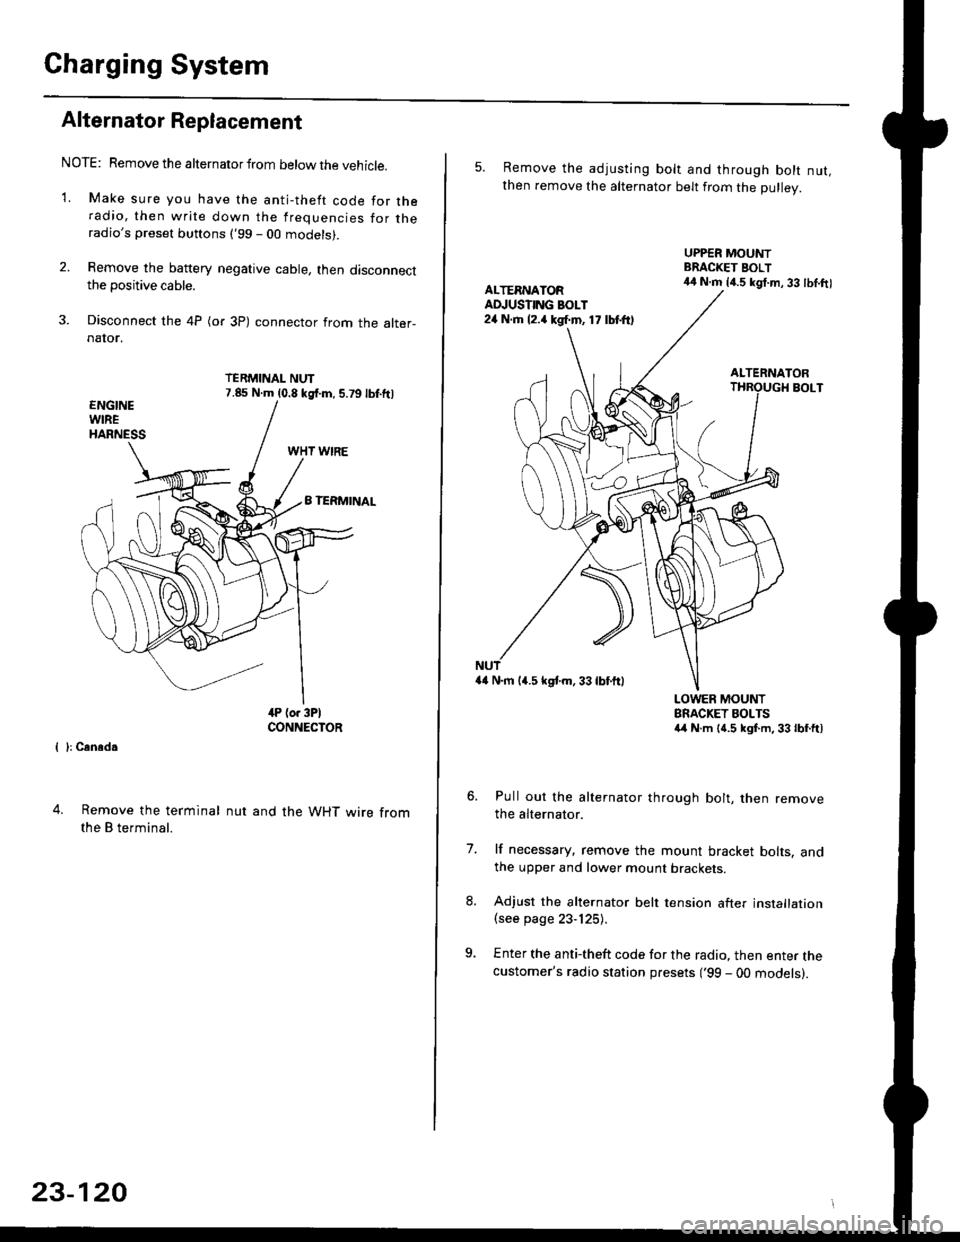 HONDA CIVIC 2000 6.G Workshop Manual Charging System
Alternator Replacement
NOTE: Remove the alternator from below the vehicle.
1. Make sure you have the anti-theft code for theradio, then write down the frequencies for theradios prese